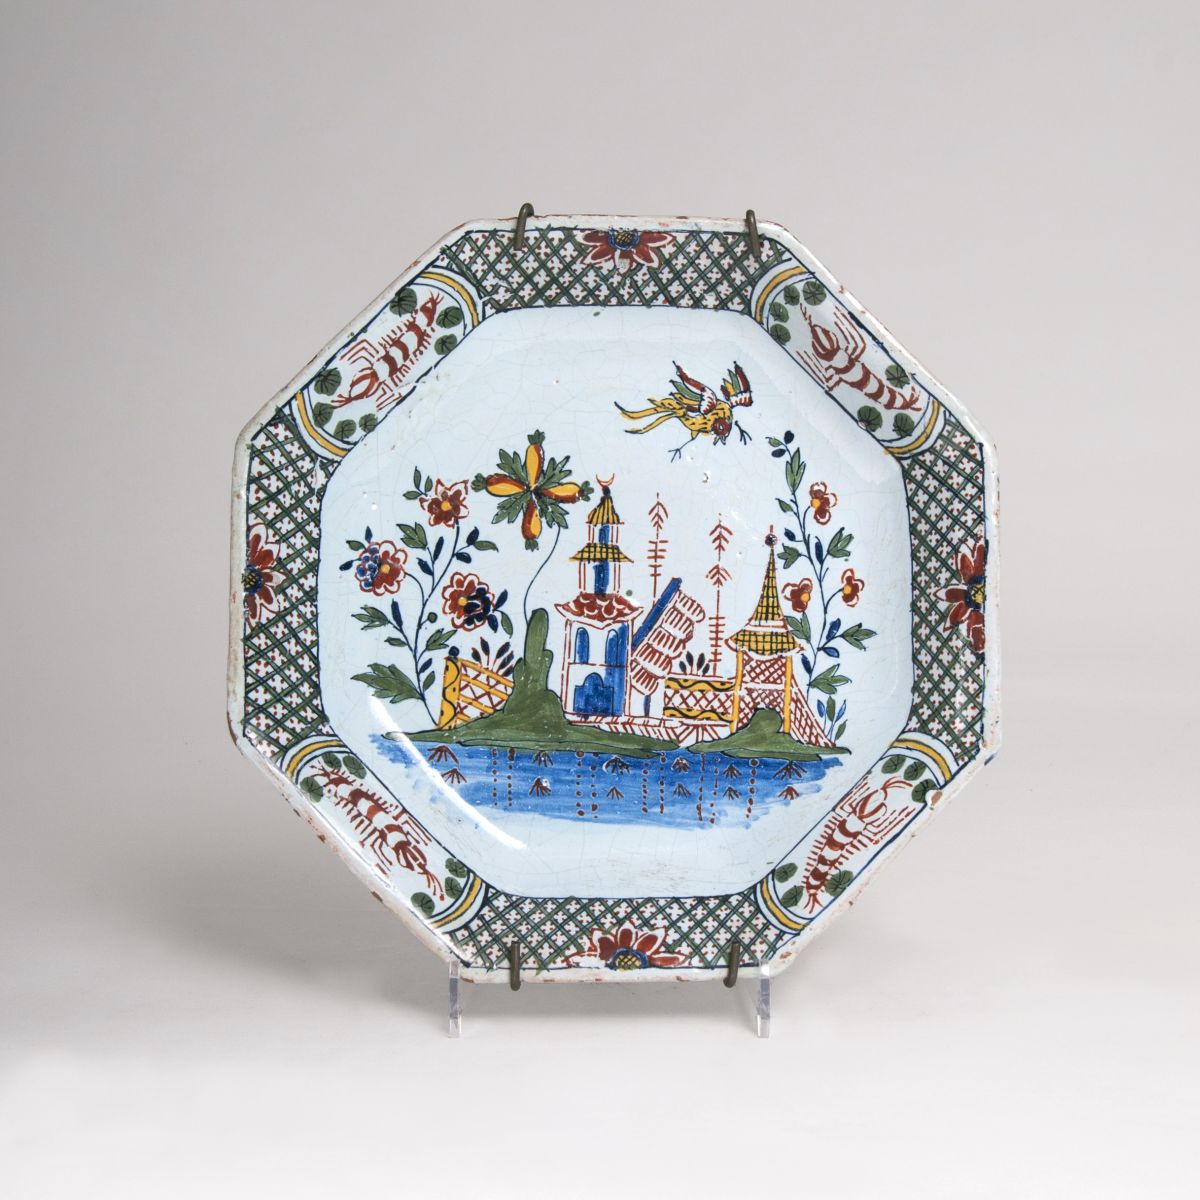 A faience plate with chinoiserie decor